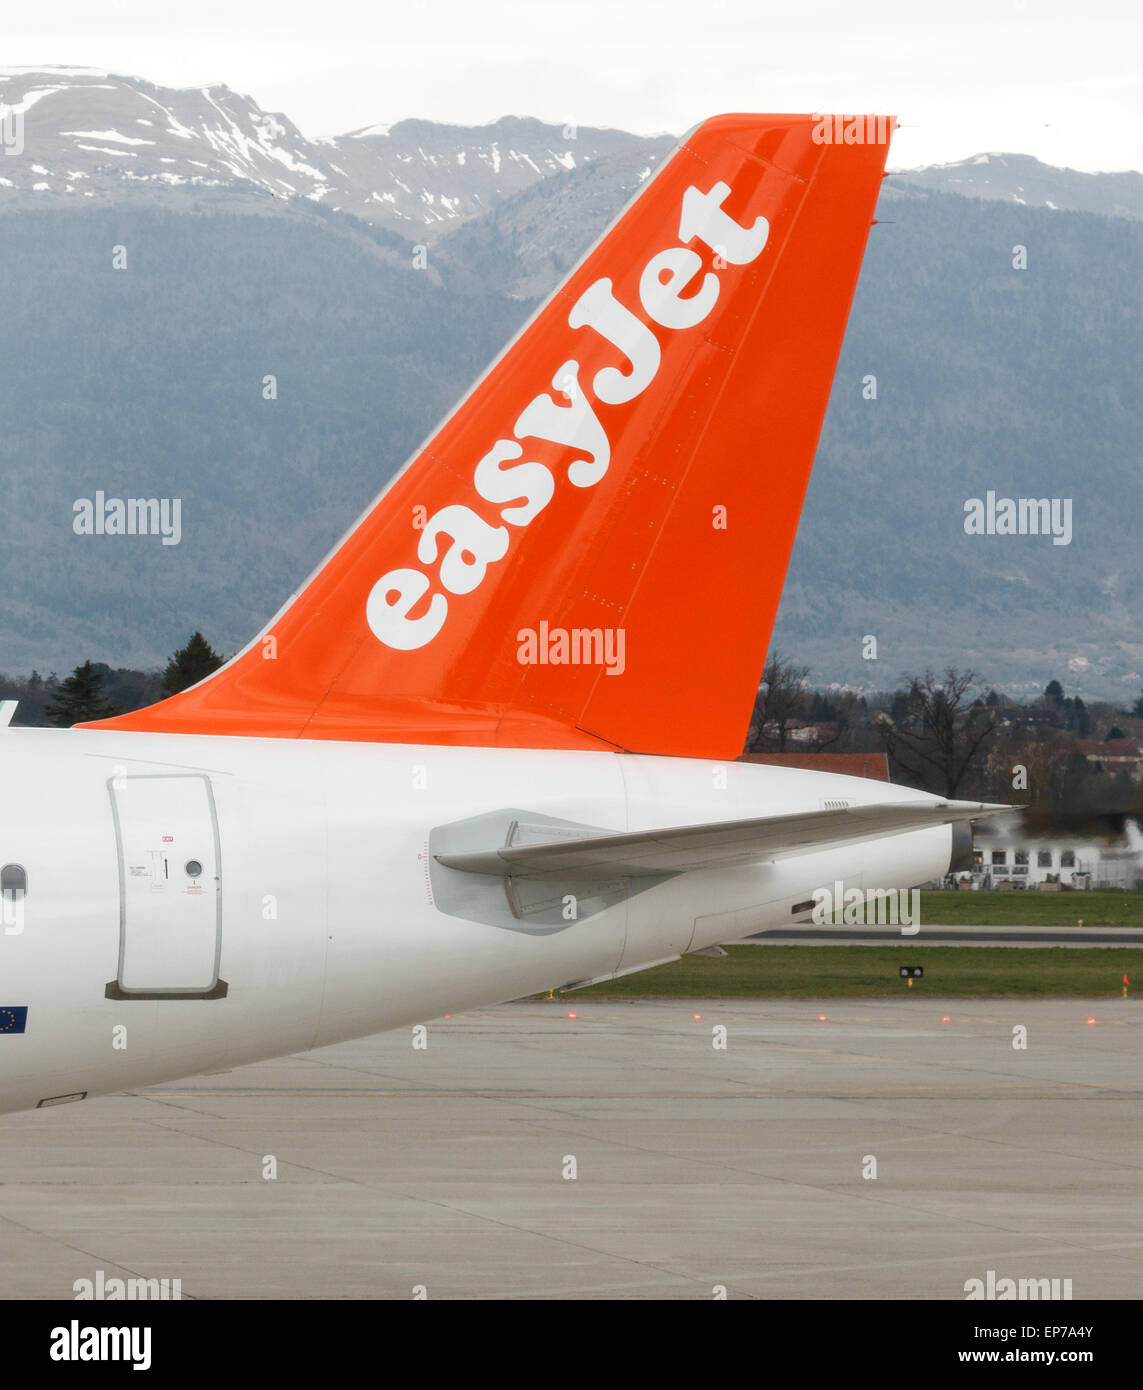 Easyjet tail fin A319 aircraft tail fin with logo Stock Photo